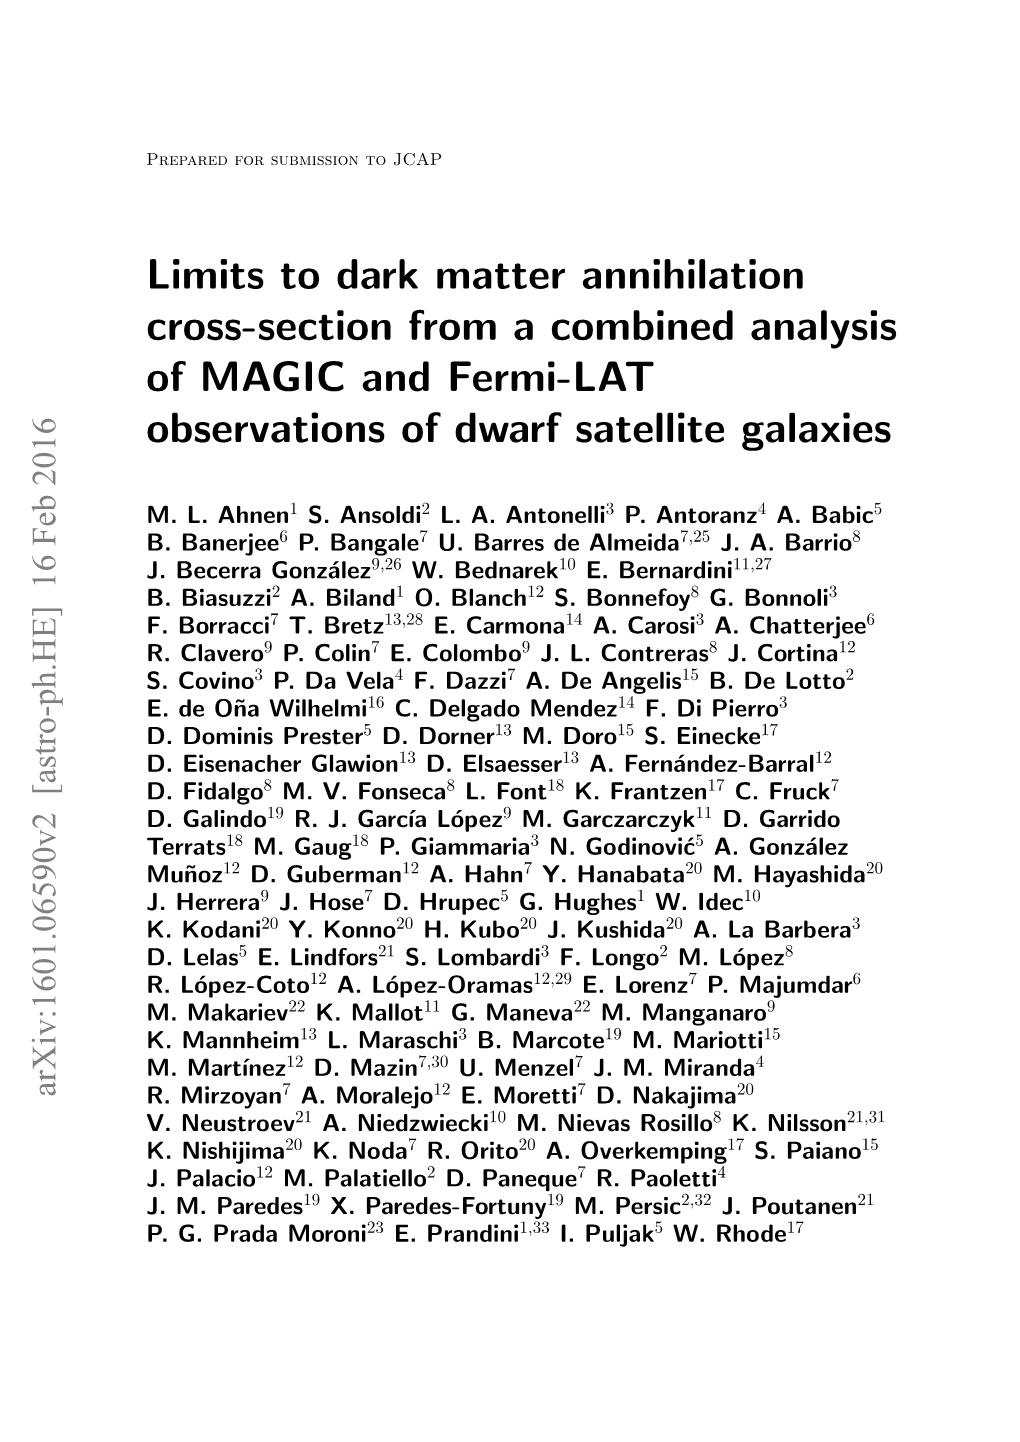 Limits to Dark Matter Annihilation Cross-Section from a Combined Analysis of MAGIC and Fermi-LAT Observations of Dwarf Satellite Galaxies